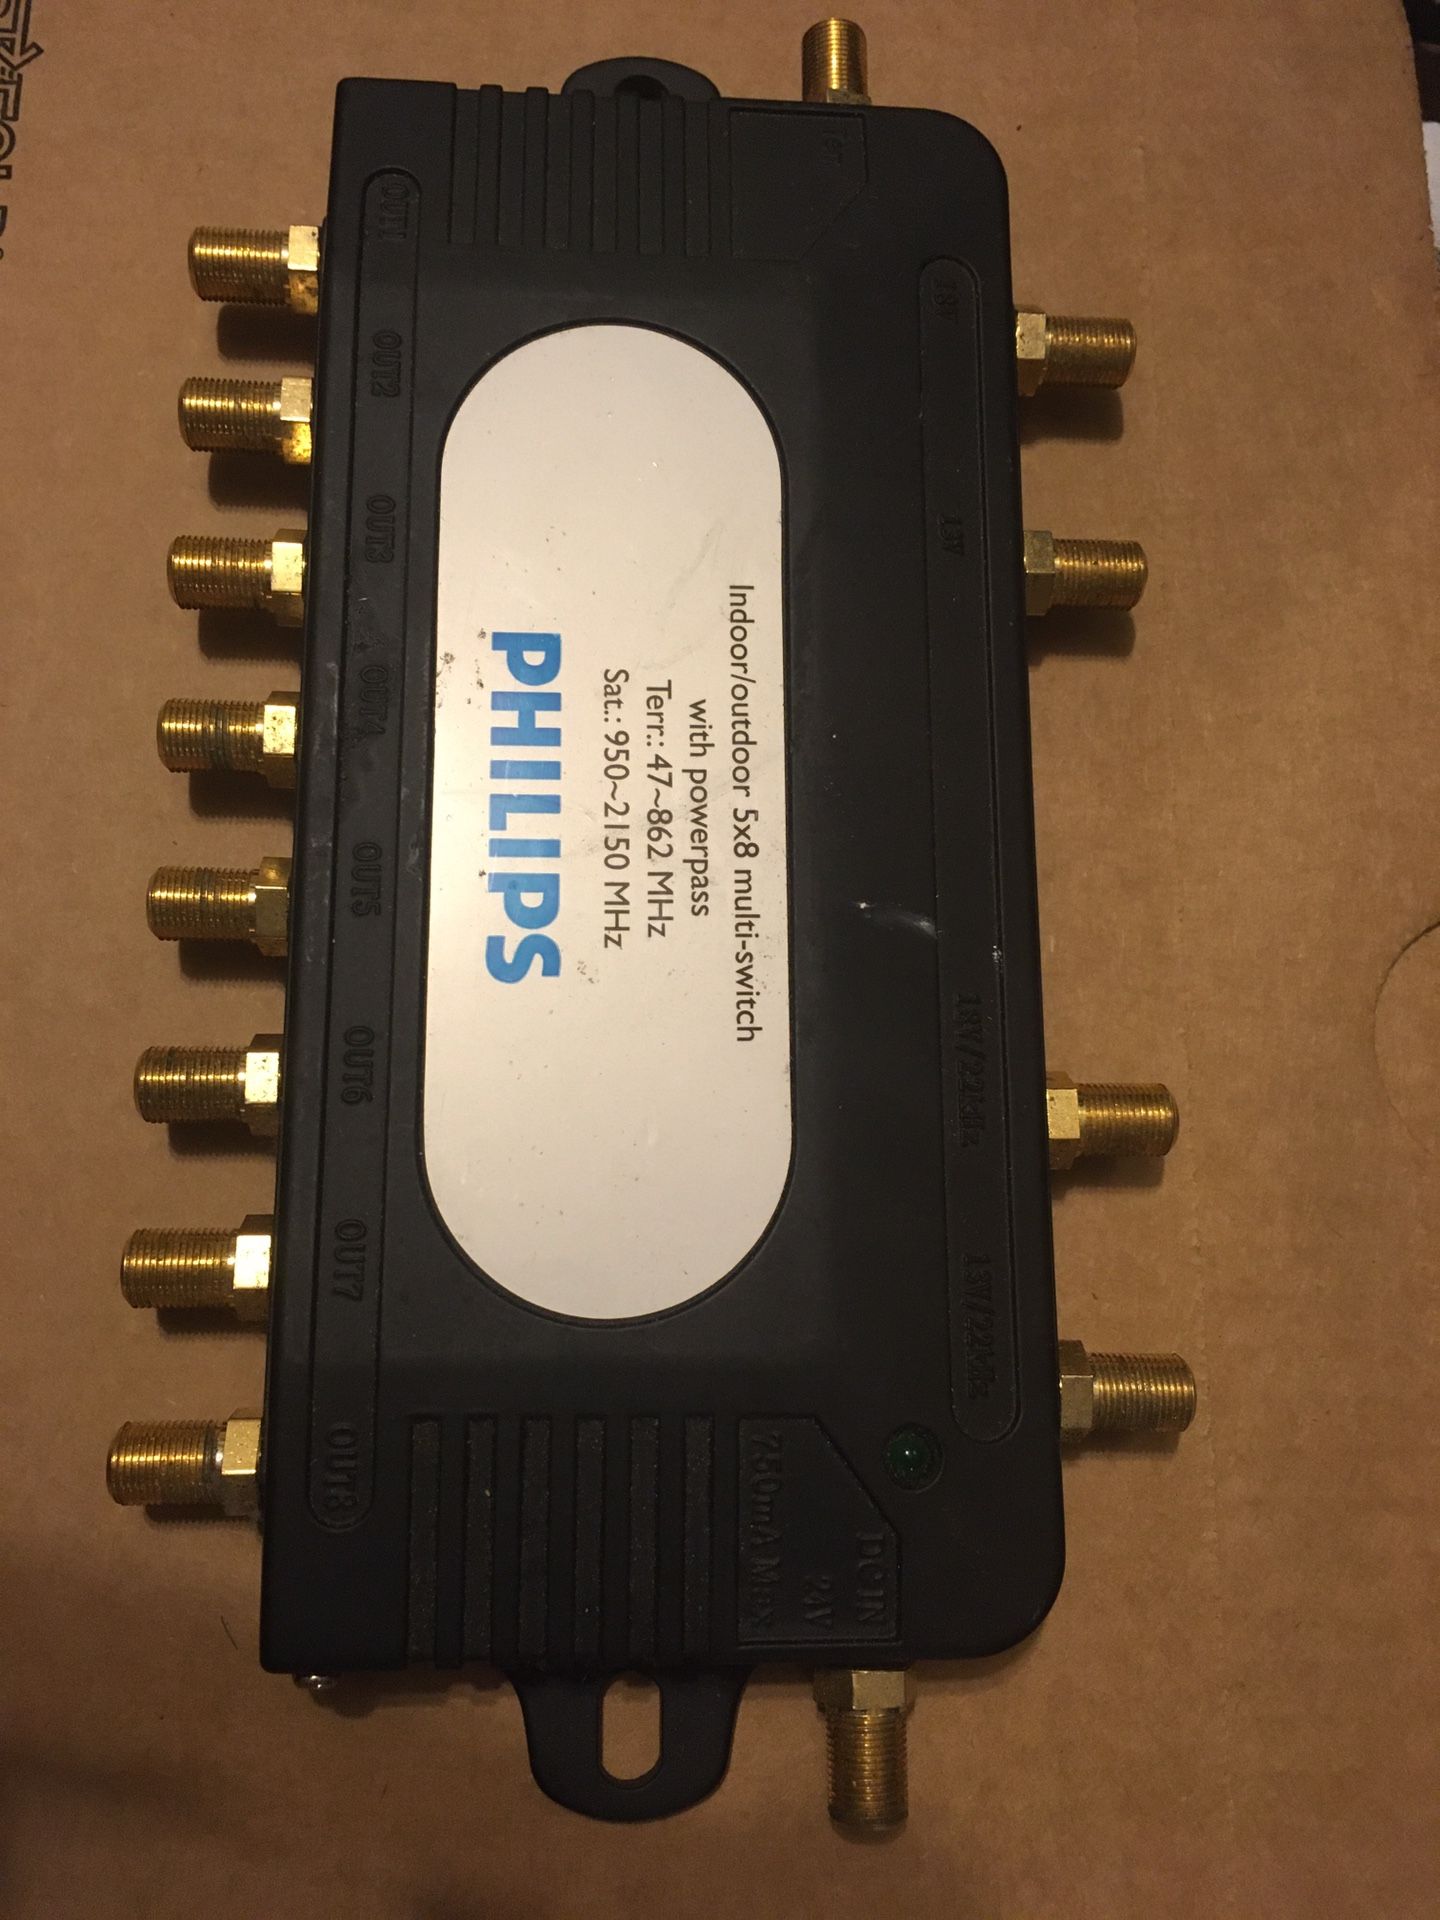 Philips 8 channel Cable multi switch